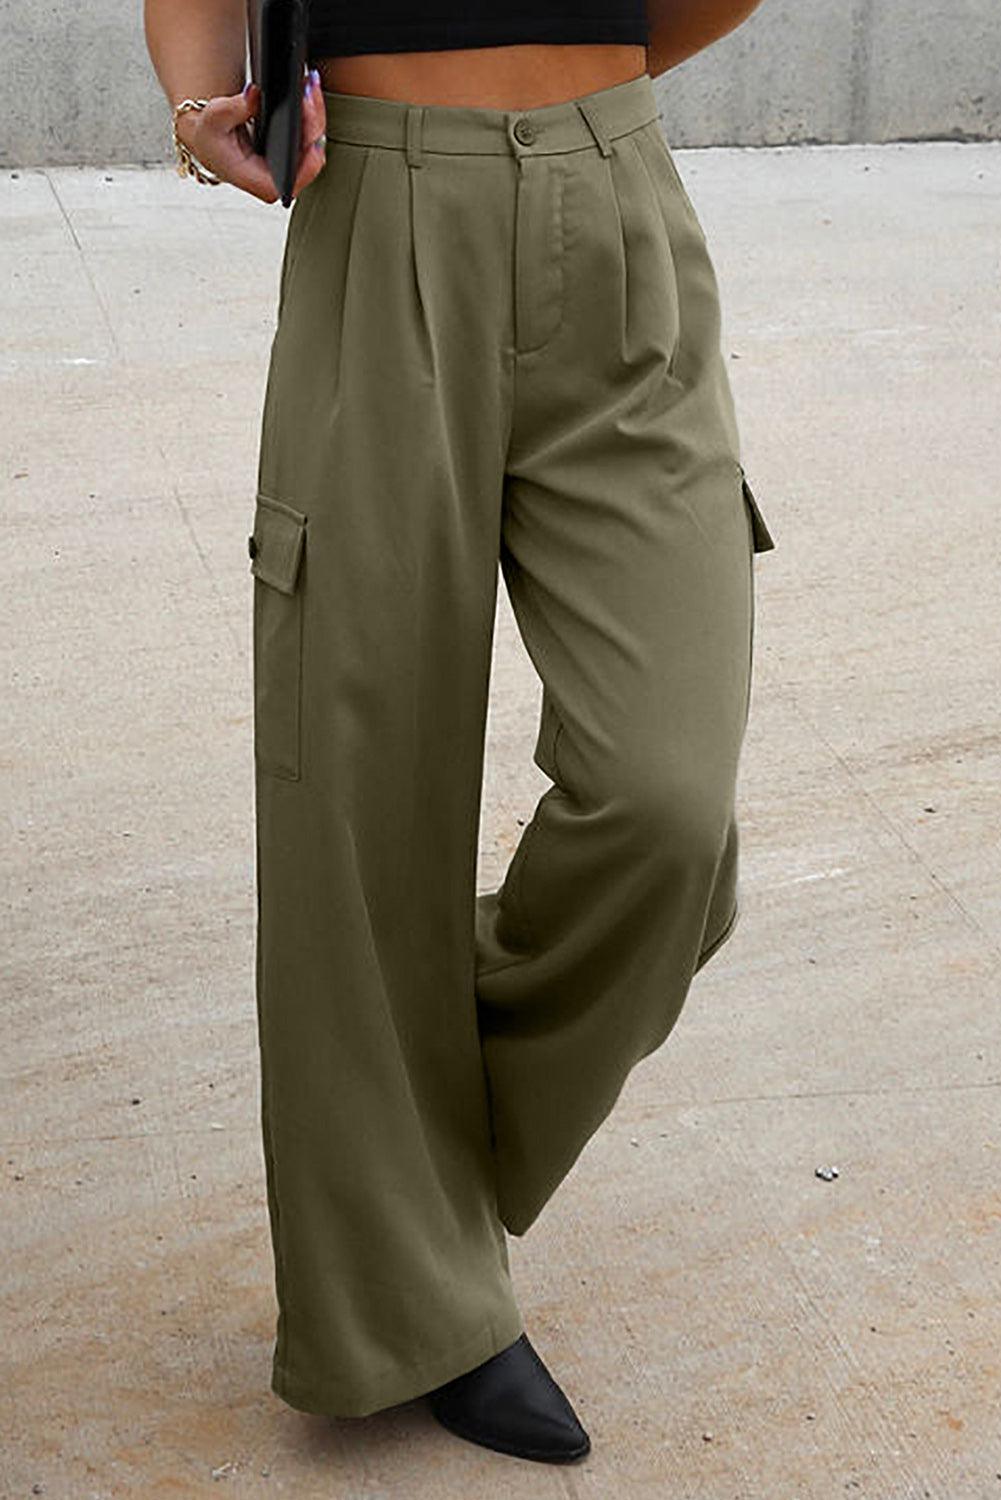 a woman in a black top and khaki pants